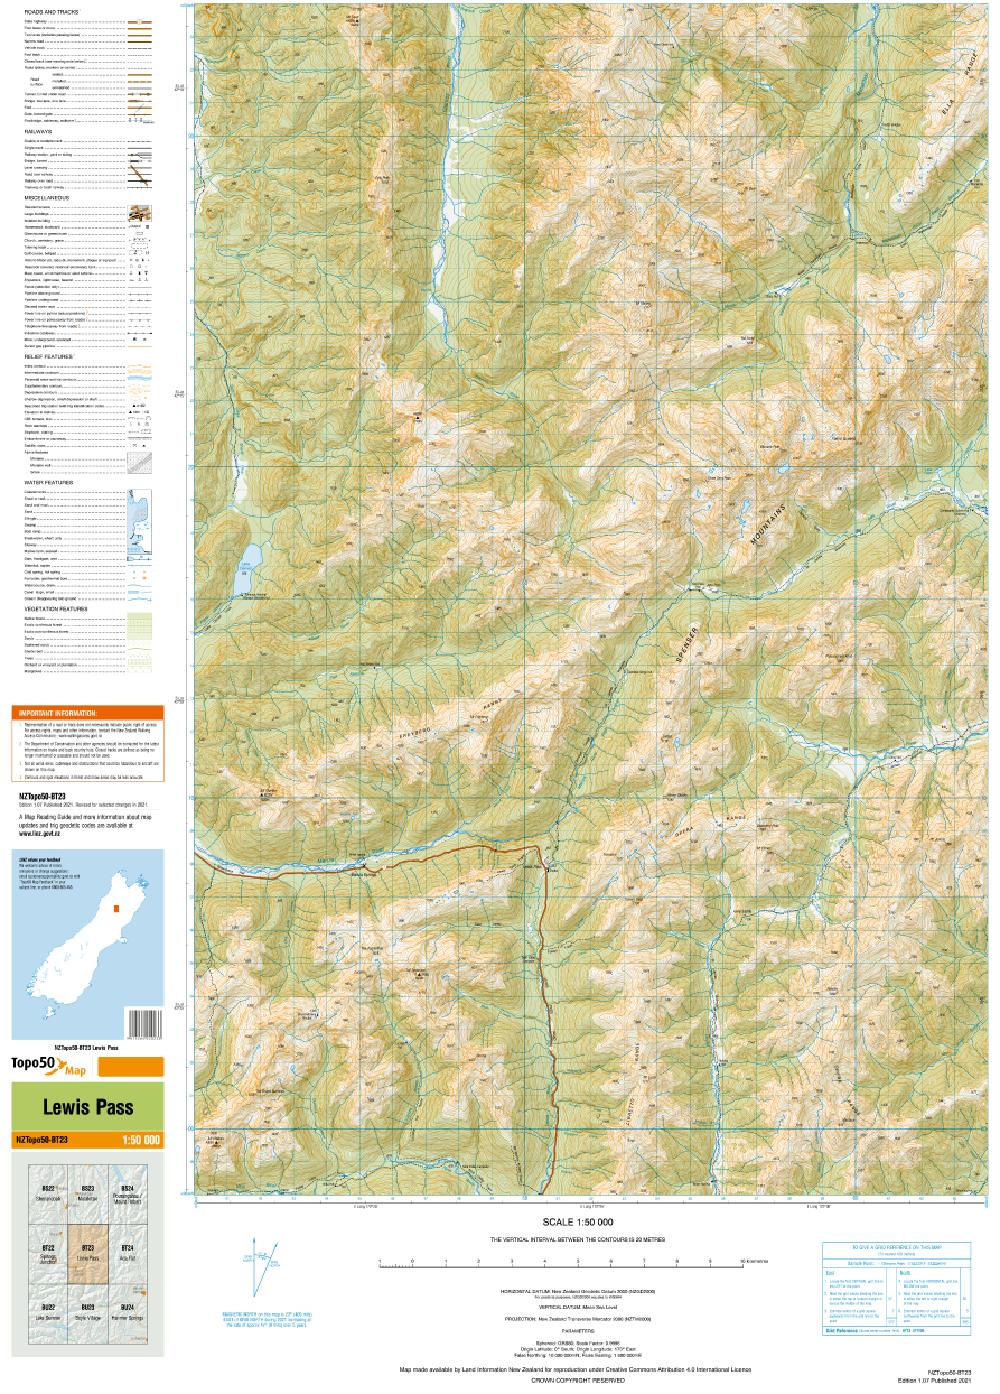 Topo map of Lewis Pass